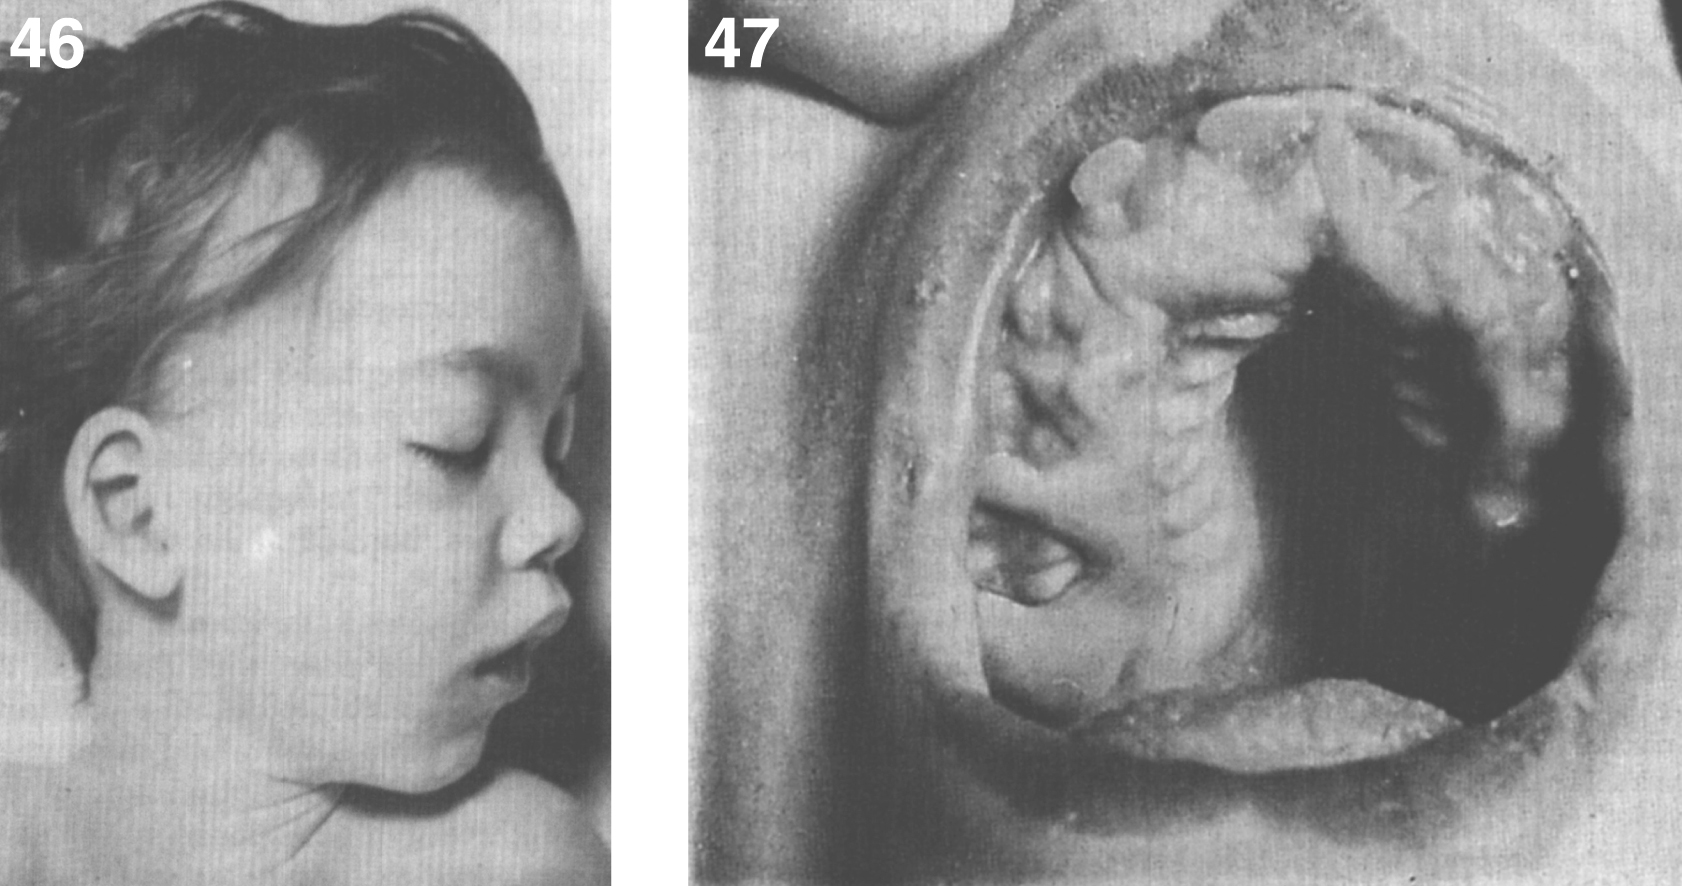 GM1 gangliosidosis type II. Facial appearance at autopsy. Mild anomalies of the ear and a prominent philtrum are present; (47) GM1 gangliosidosis type II. Appearance of oral cavity at autopsy. Note marked gingival hypertrophy.